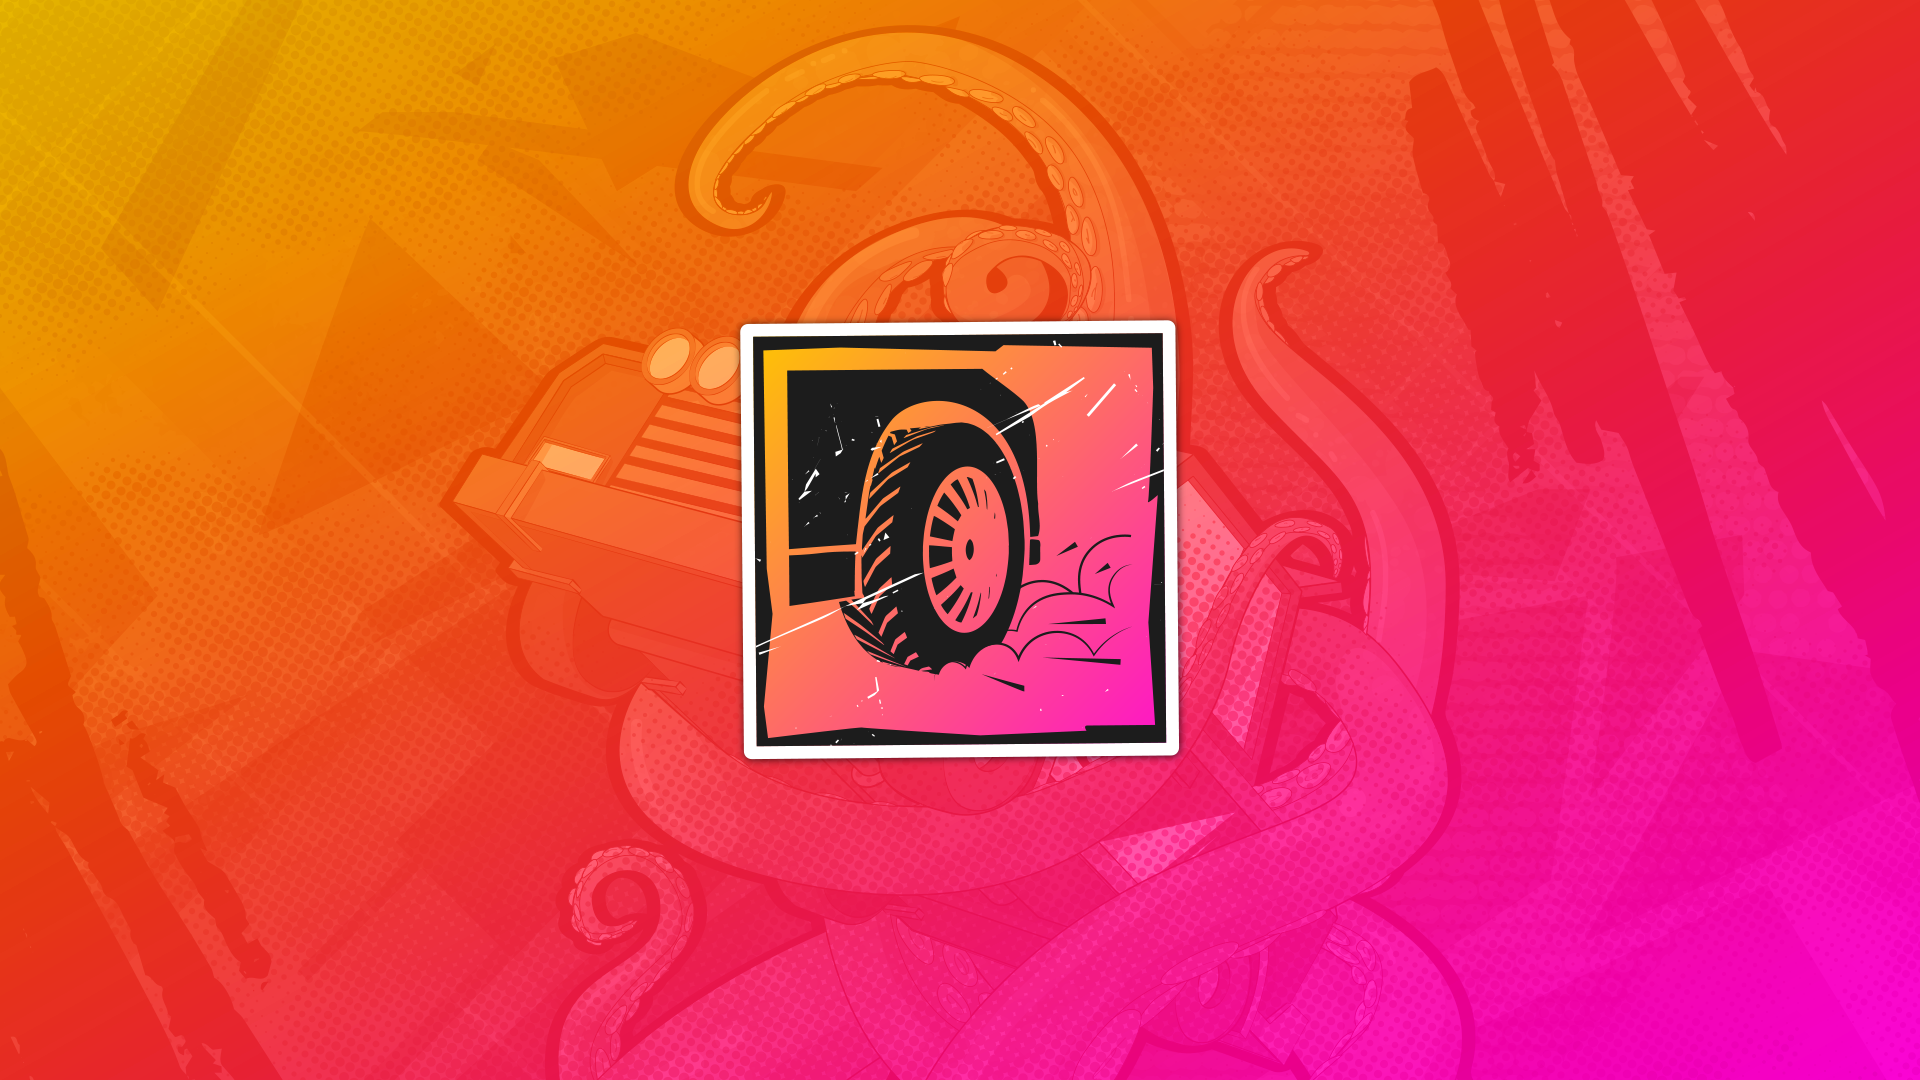 Icon for Gonna Need New Tyres